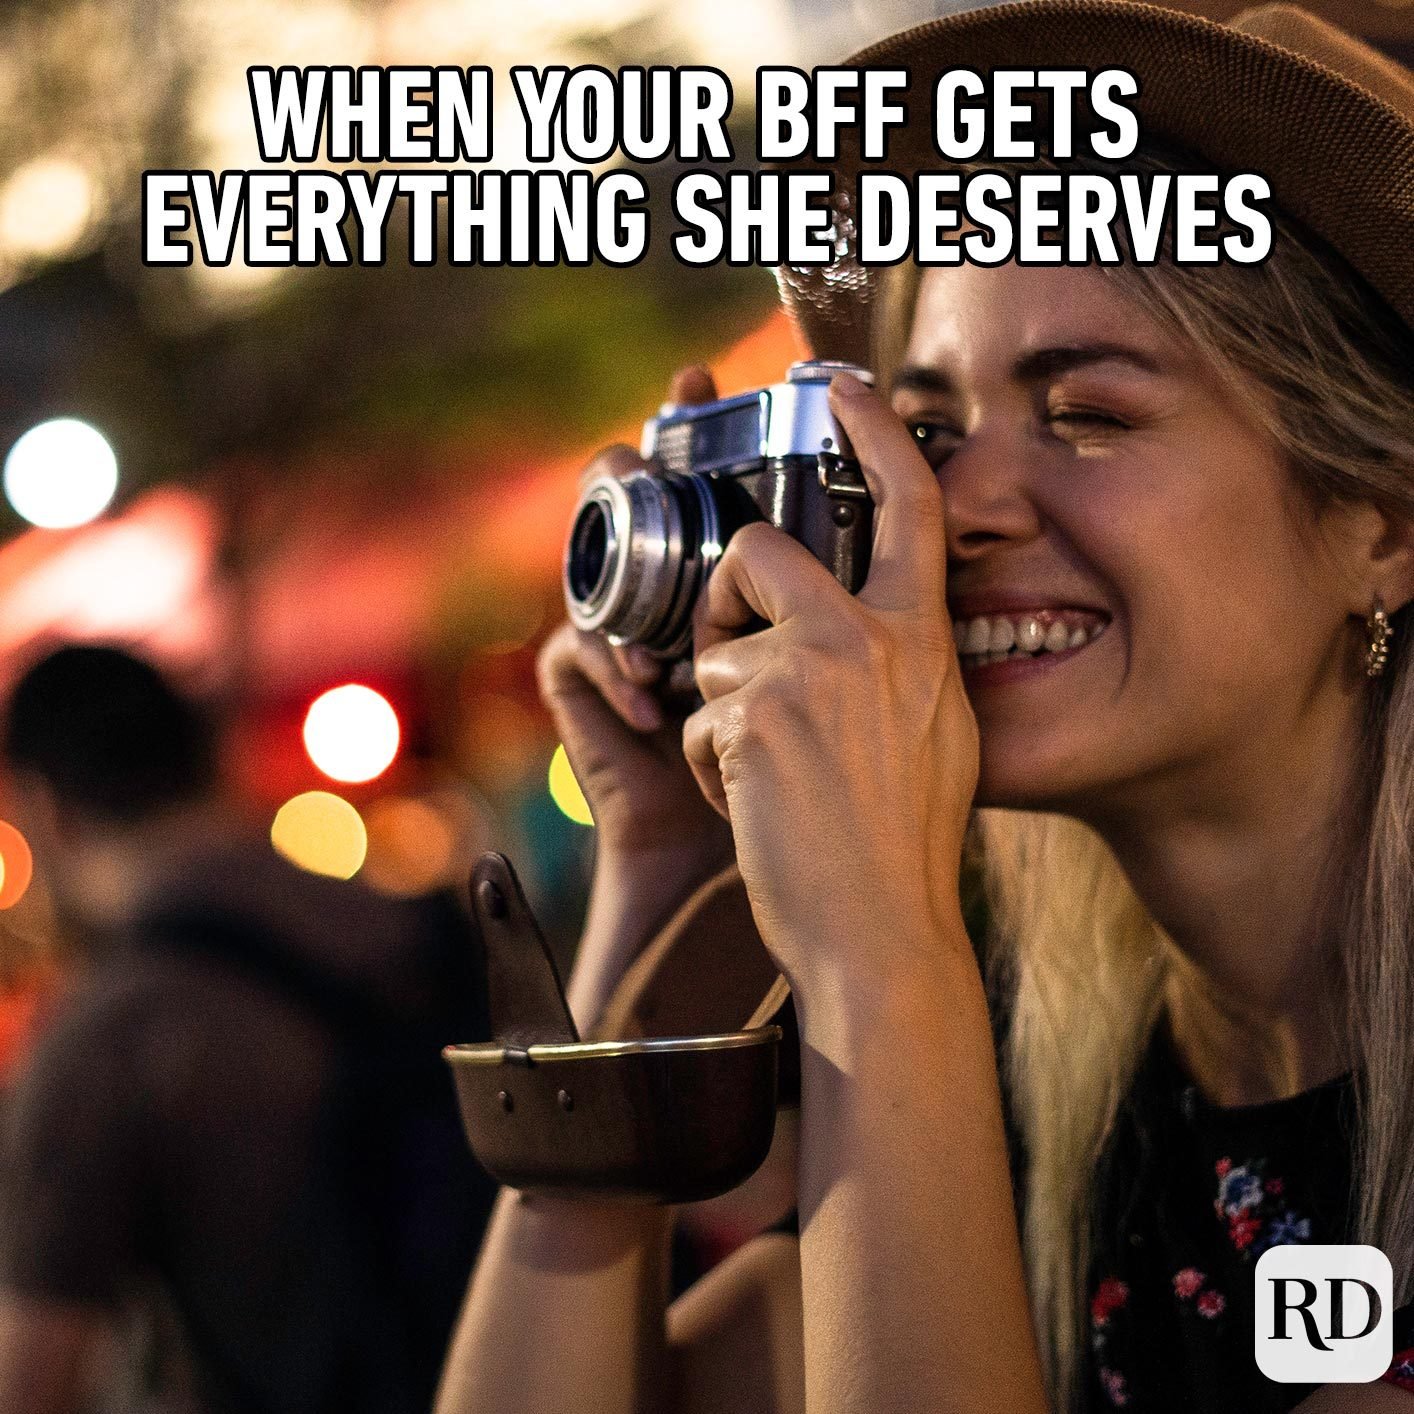 Woman smiling into camera. Meme text: When your BFF gets everything she deserves